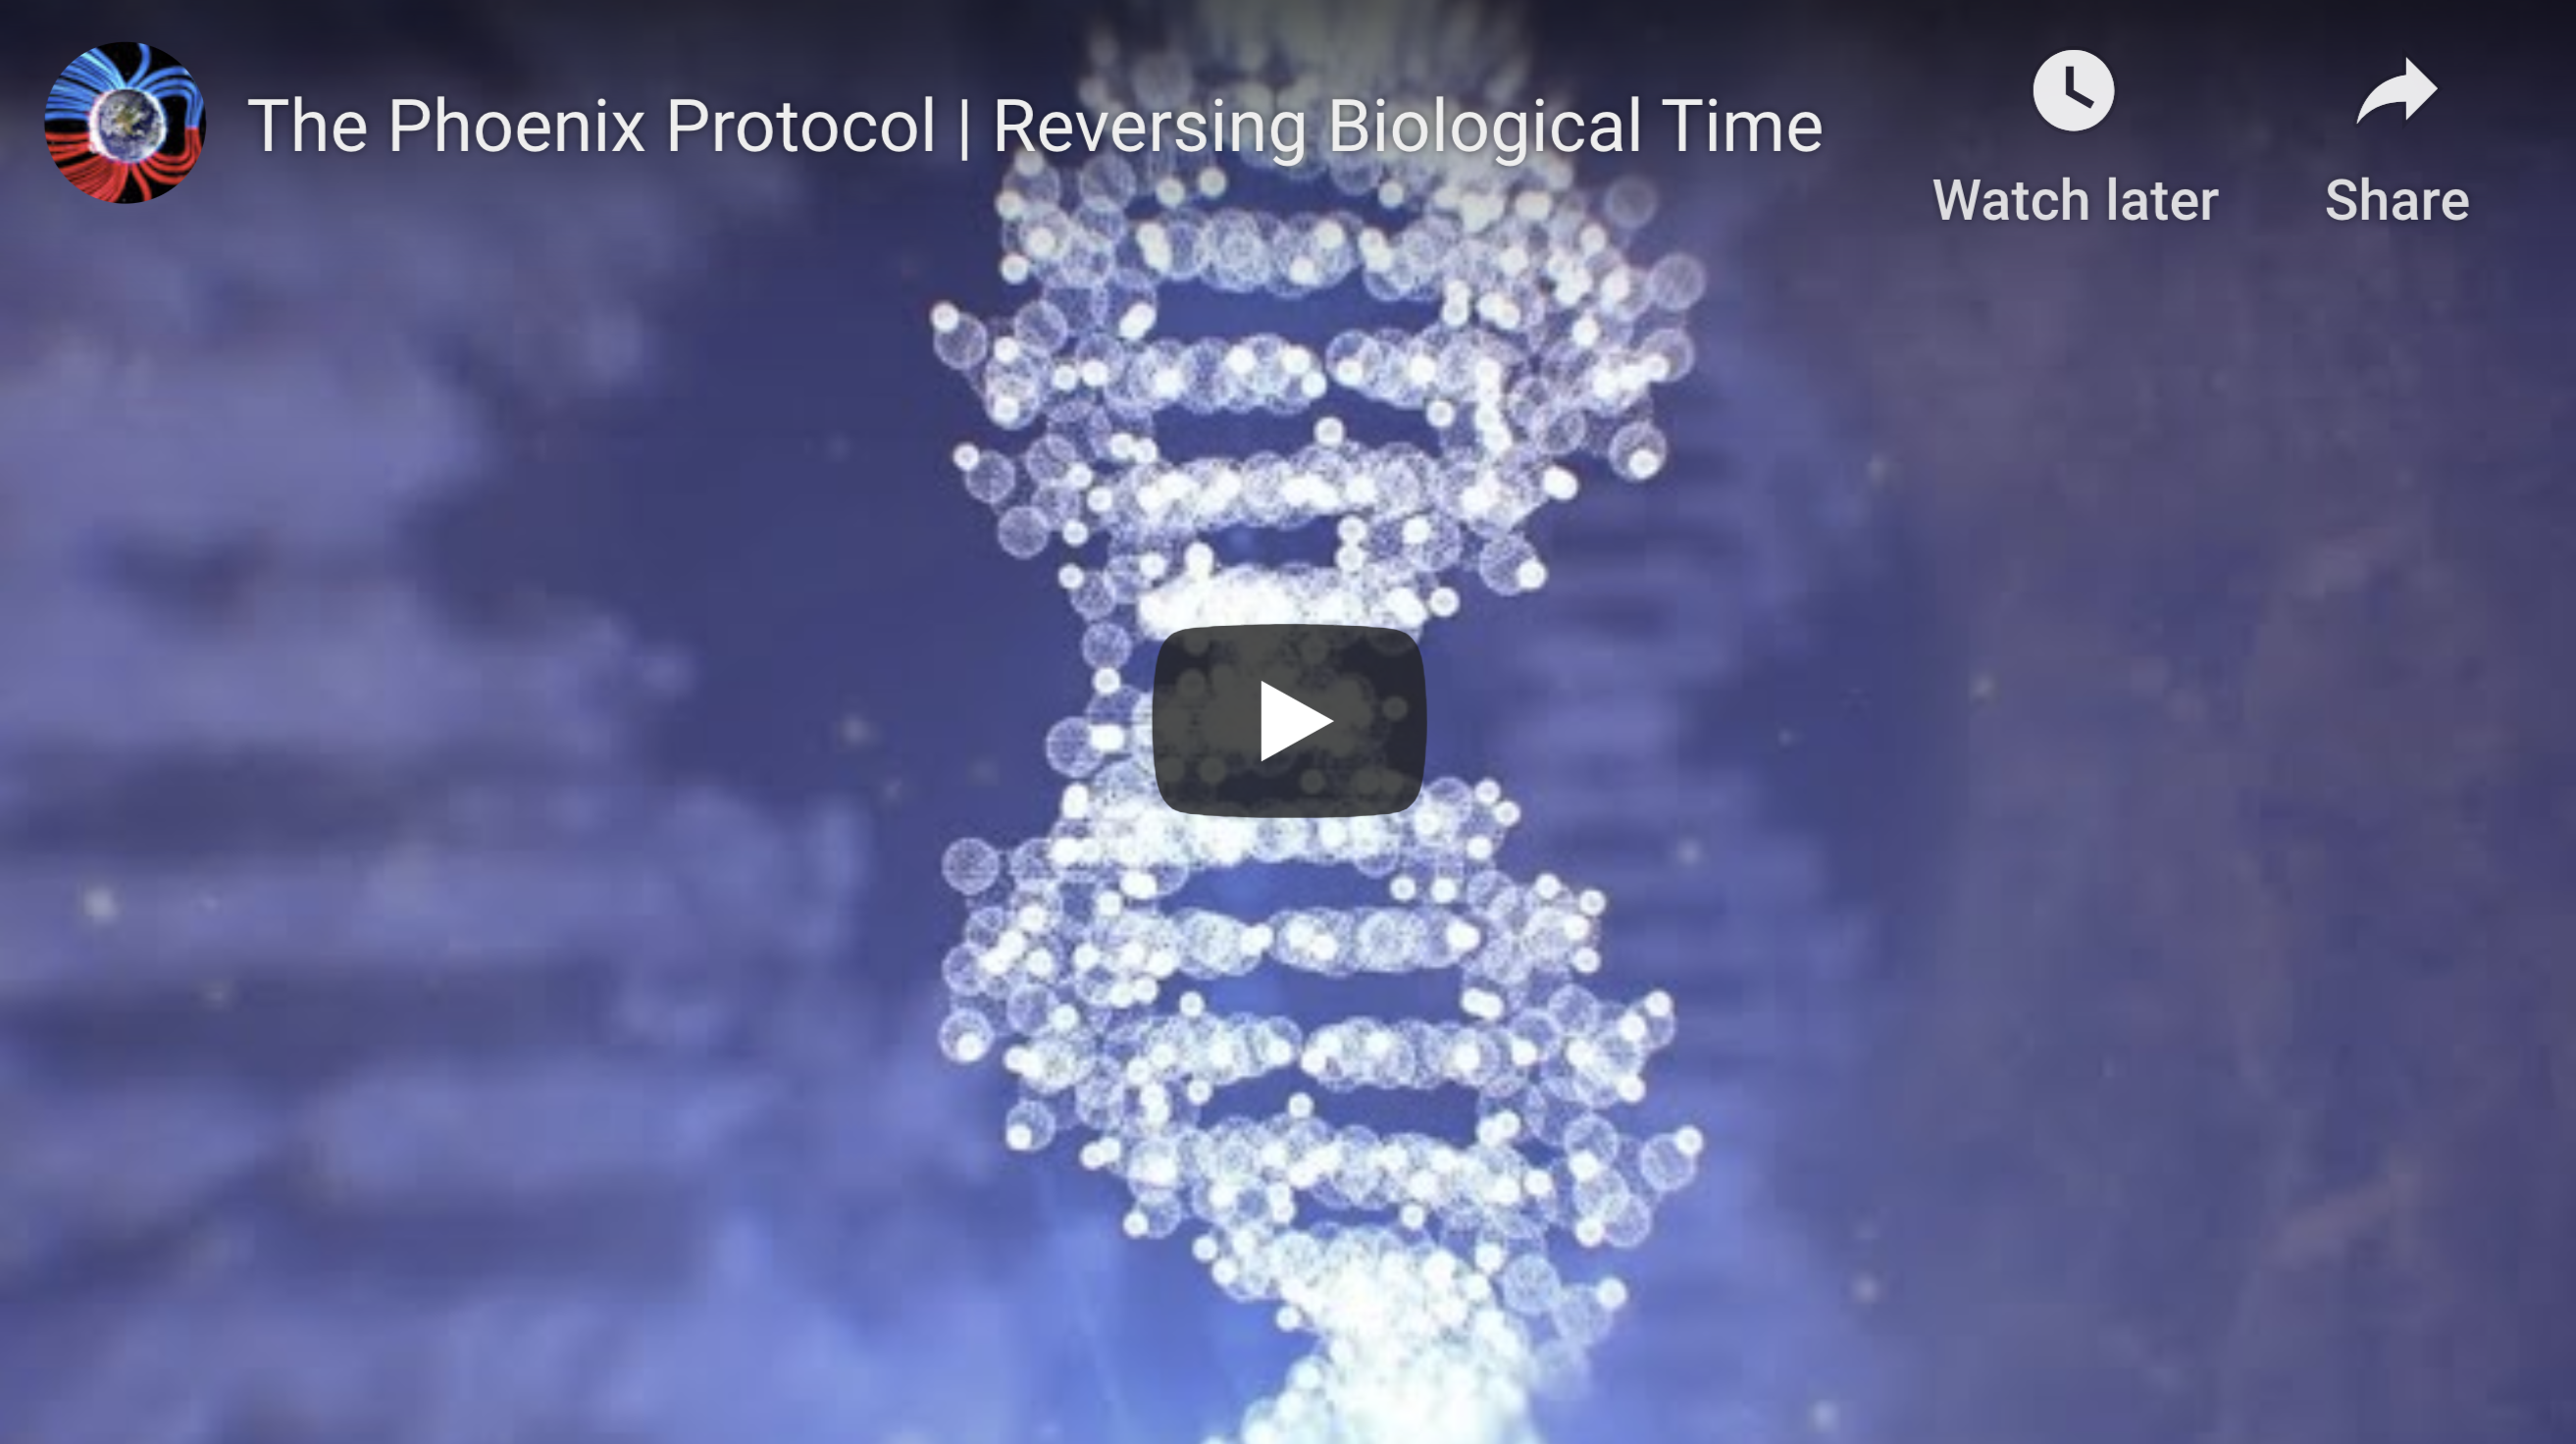 The Phoenix Protocol Reversing Biological Time EXZM Suspicious Observers post July 6th 2020